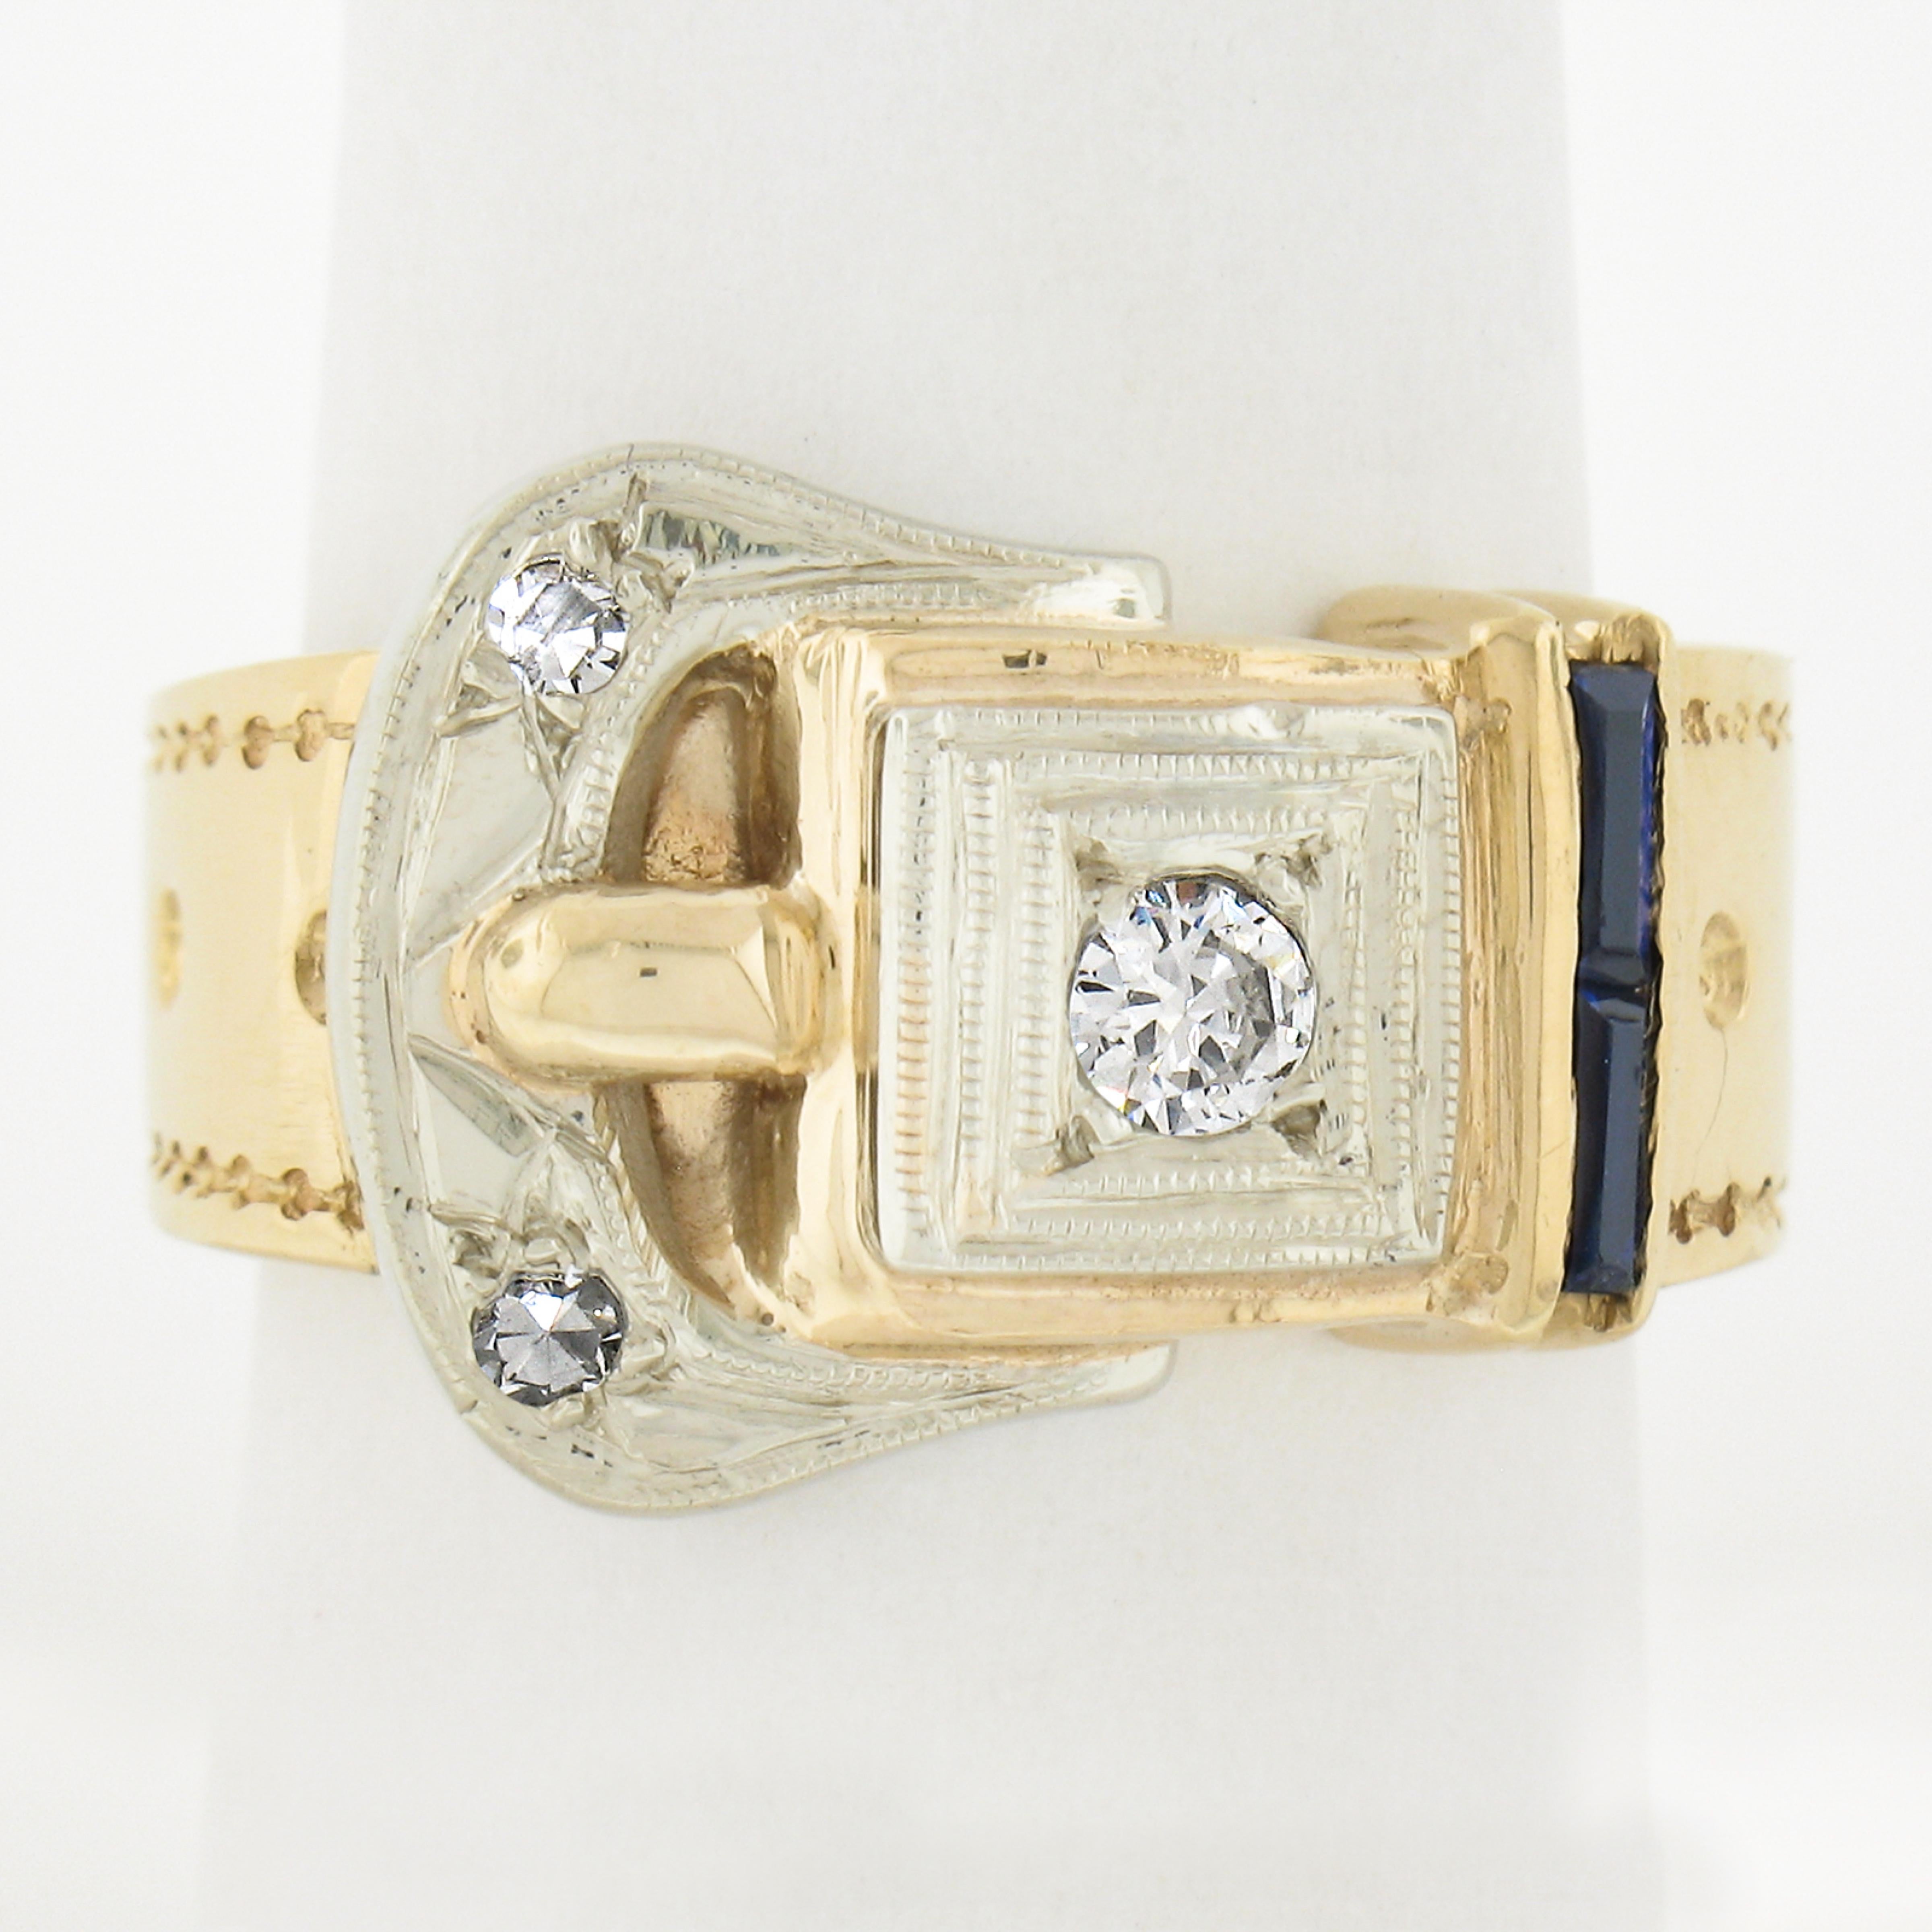 This retro vintage ring is crafted in solid 14k yellow gold with white gold accents in a buckle design. This is a very well made ring that is ready to wear and is guaranteed to please. Enjoy :)

--Stone(s):--
(2) Synthetic Sapphire - Baguette Cut -